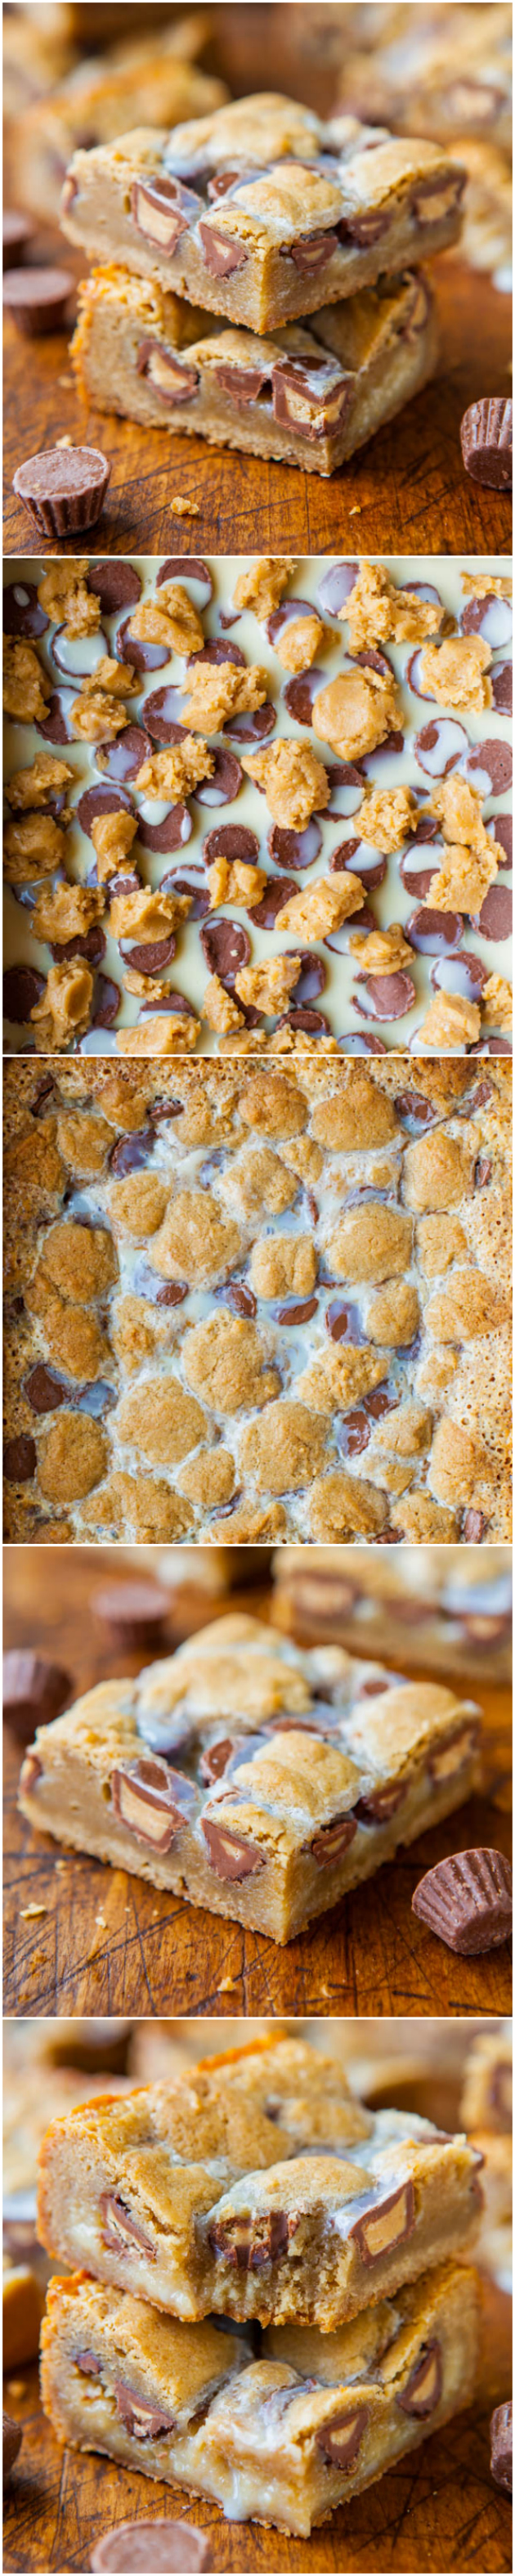 Peanut Butter Cup Cookie Dough Crumble Bars - Soft, chewy, gooey & loaded with Peanut Butter Cups! Easy recipe at averiecooks.com